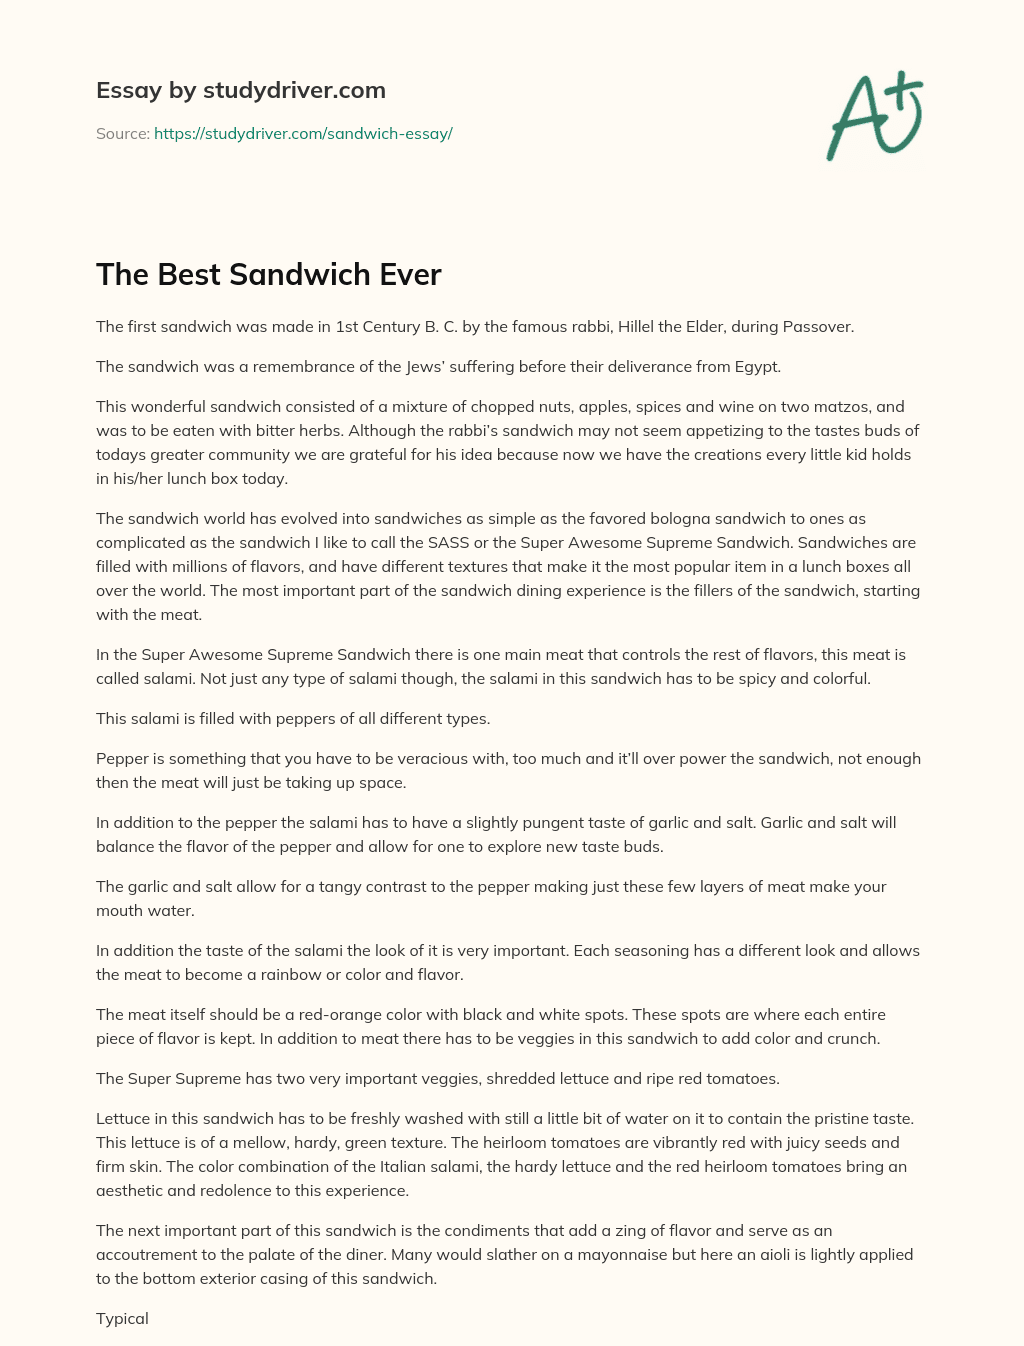 The Best Sandwich Ever essay